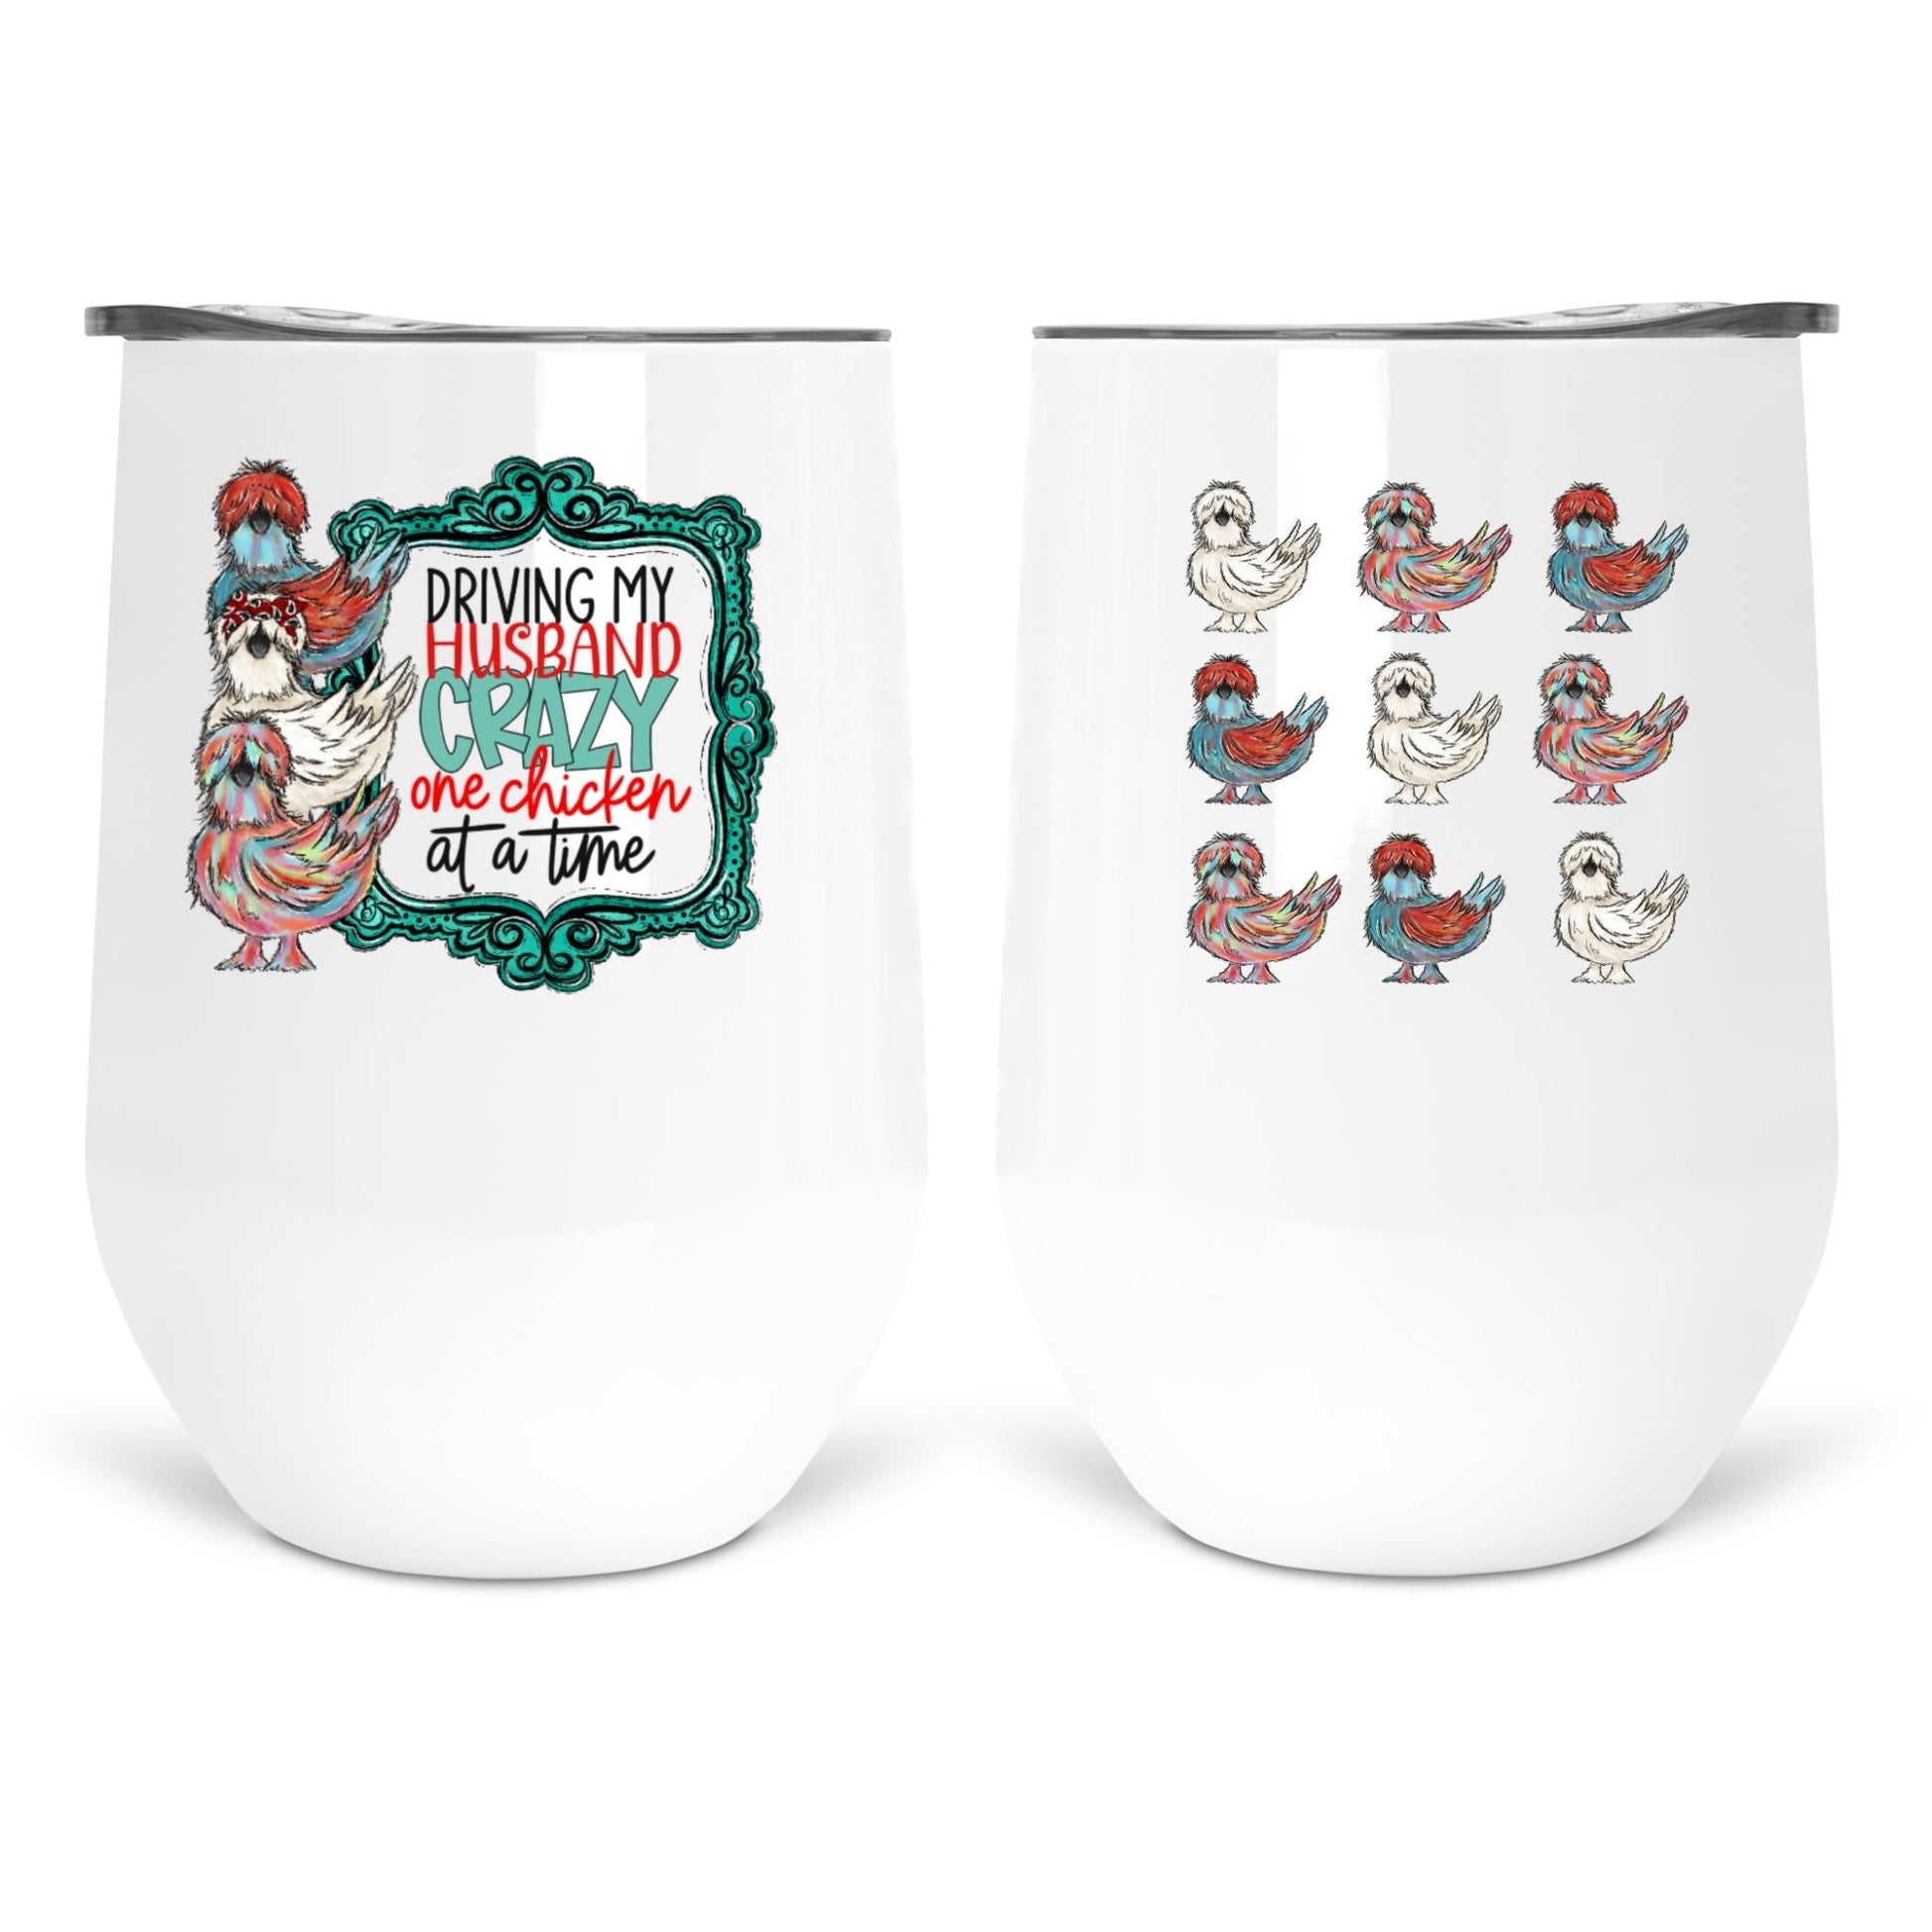 Driving My Husband Crazy One Chicken At A Time Drinkware ~ Funny Silkie Chickens Tumbler - Jammin Threads